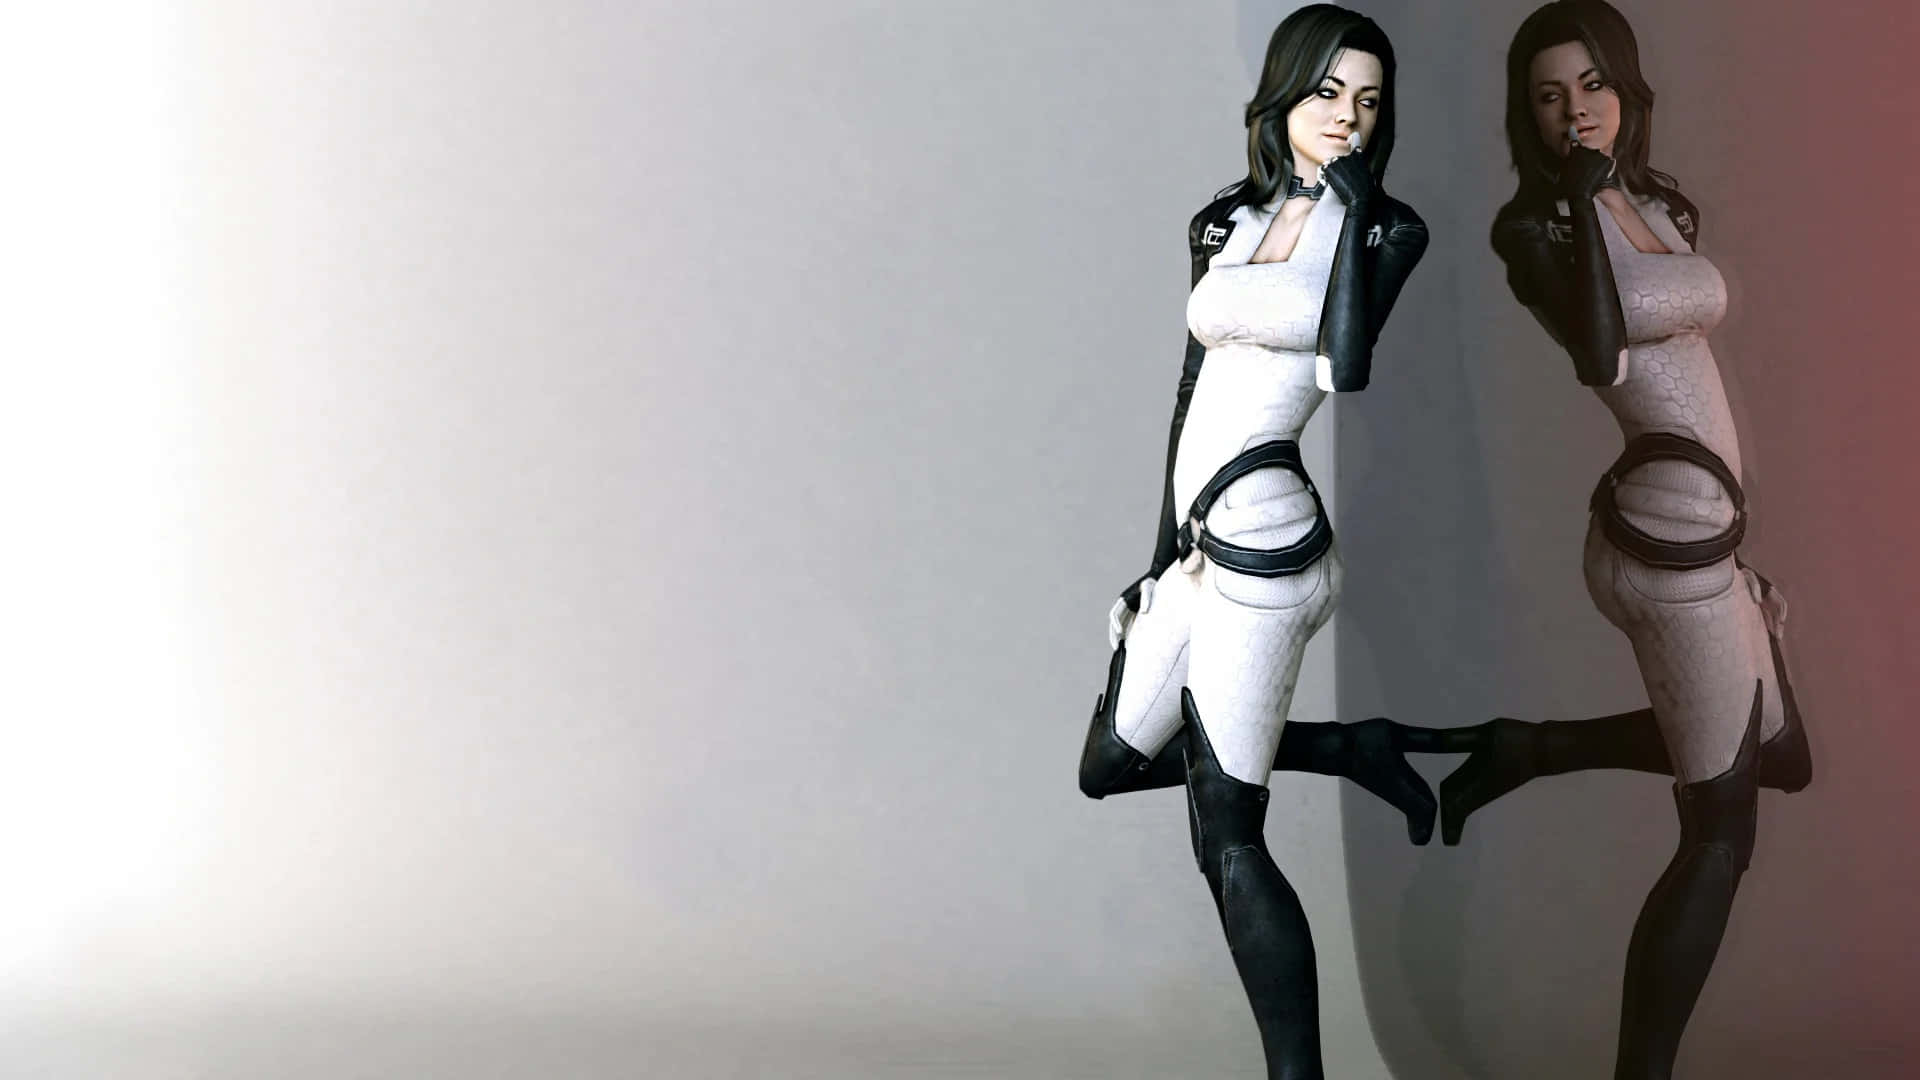 Miranda Lawson - A Powerful Biotic and Cerberus Officer in the Mass Effect Universe Wallpaper